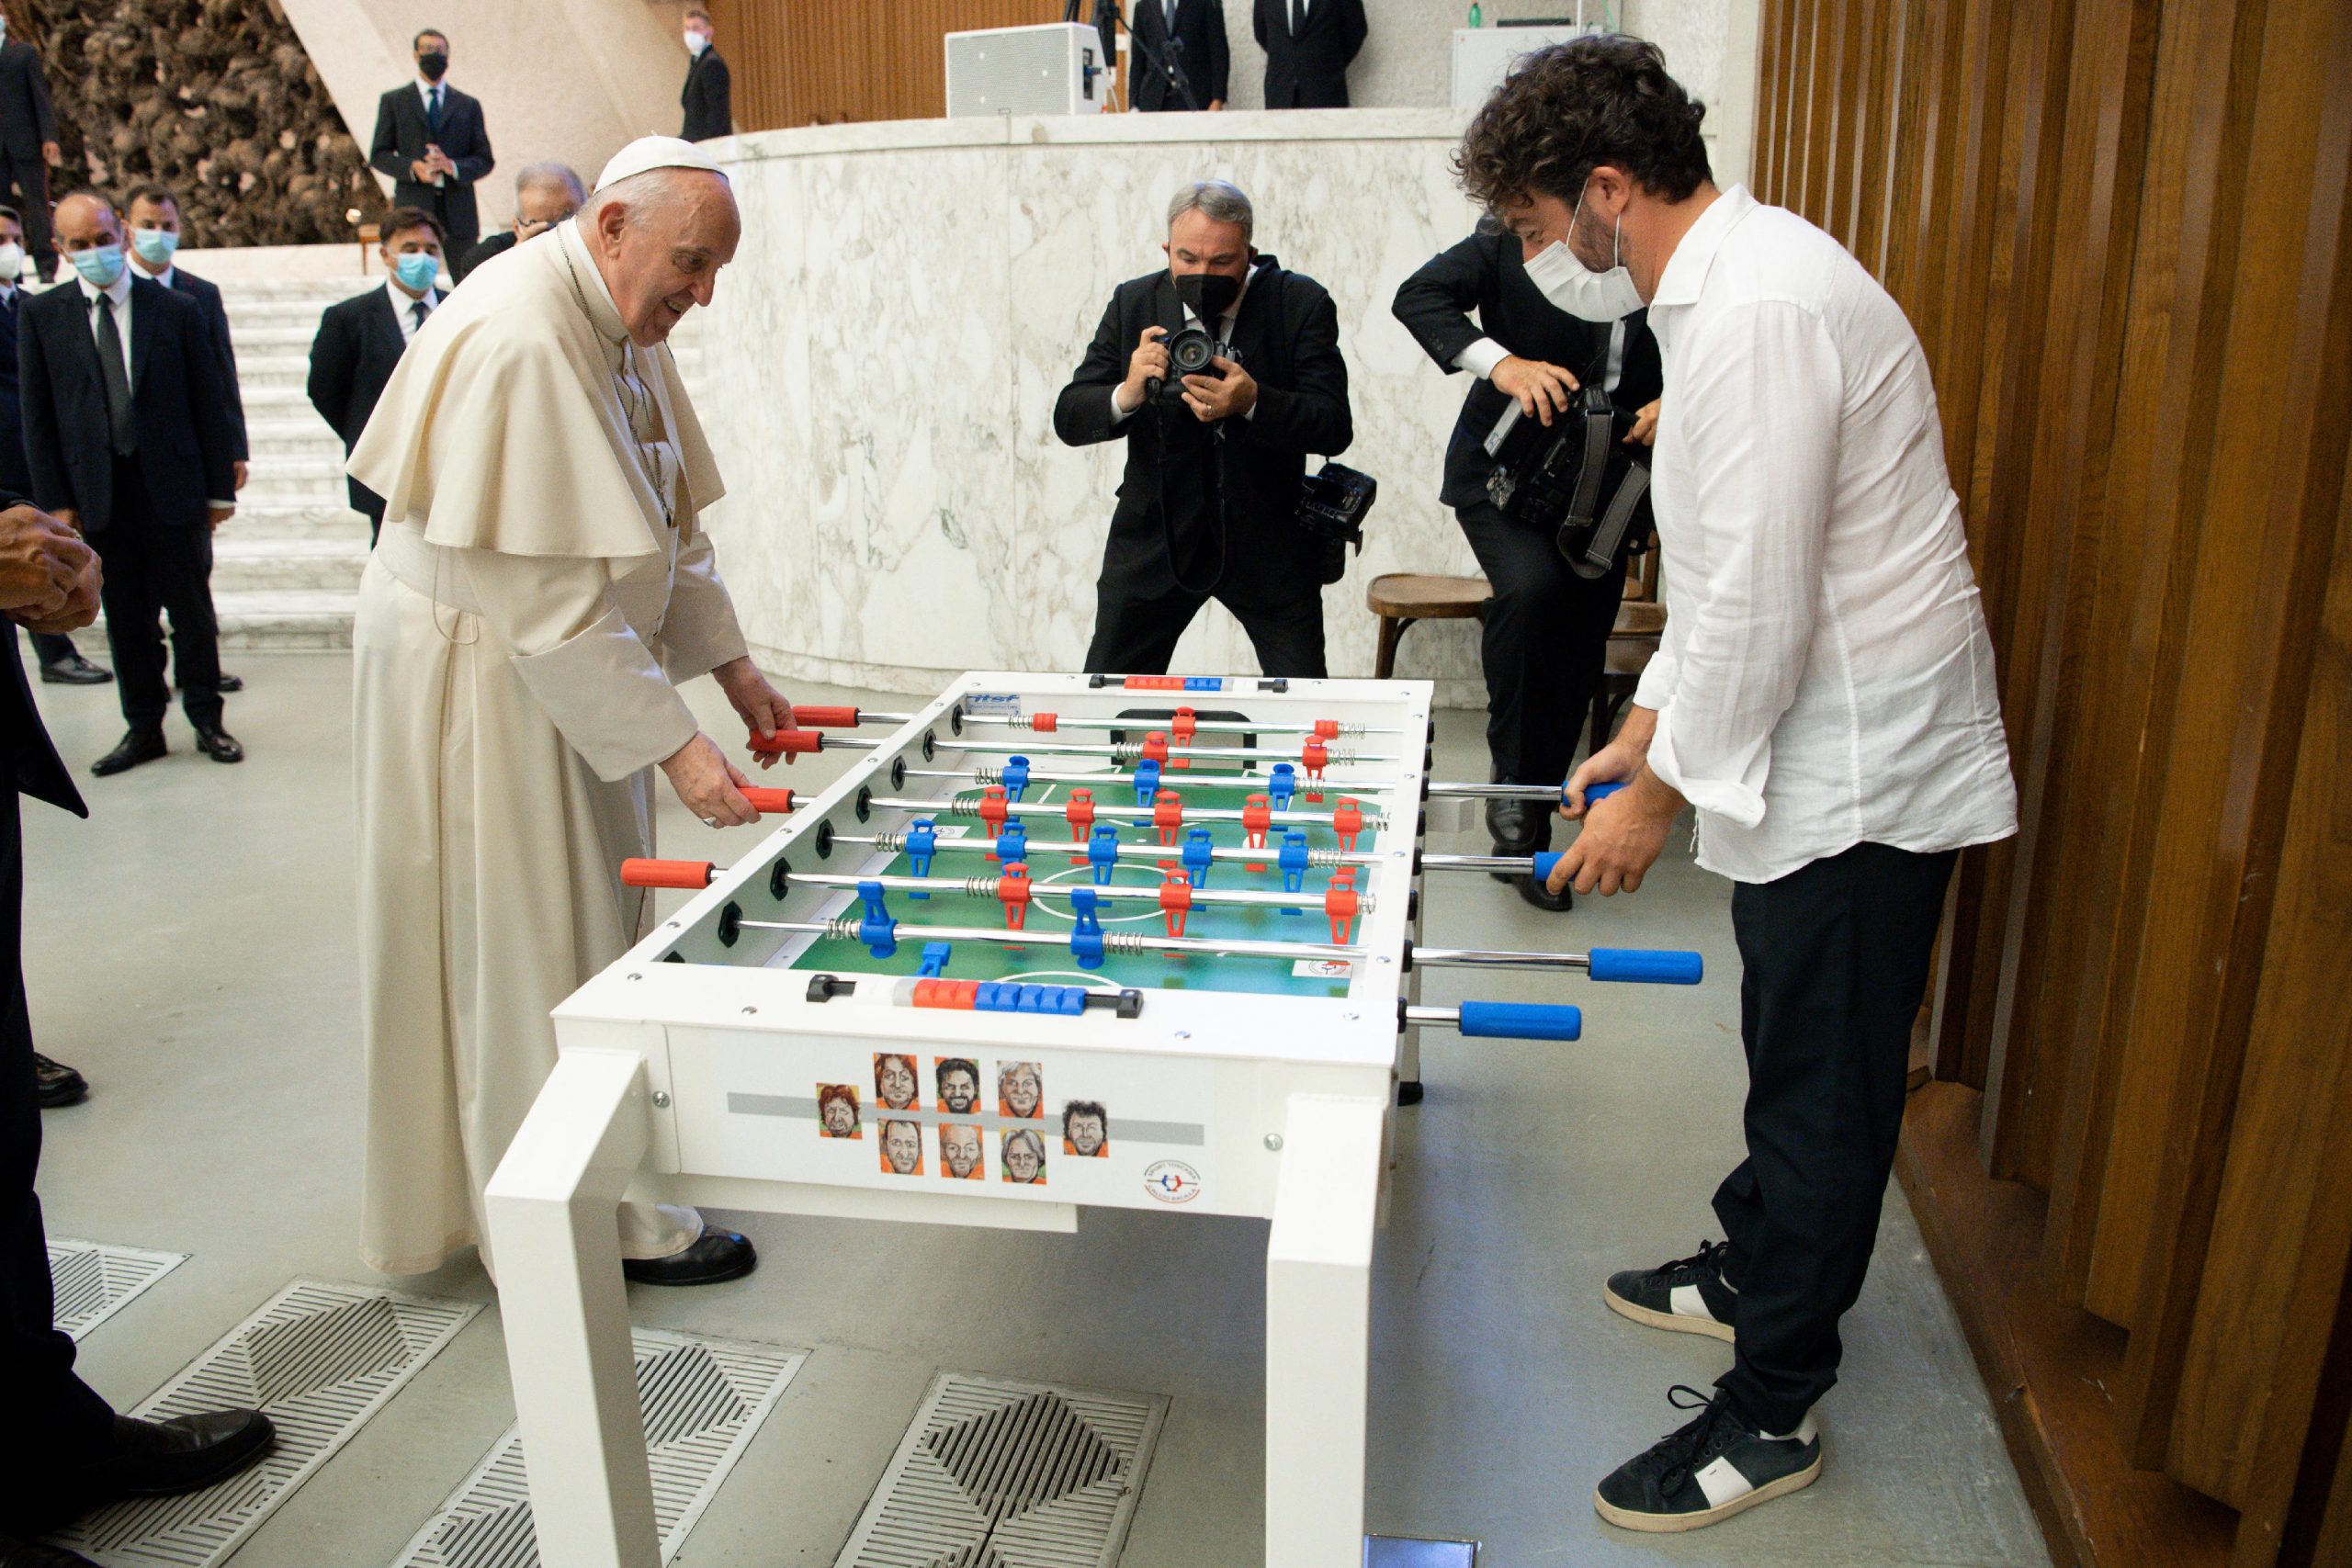 Football-loving Pope Francis gets a new toy: A foosball table